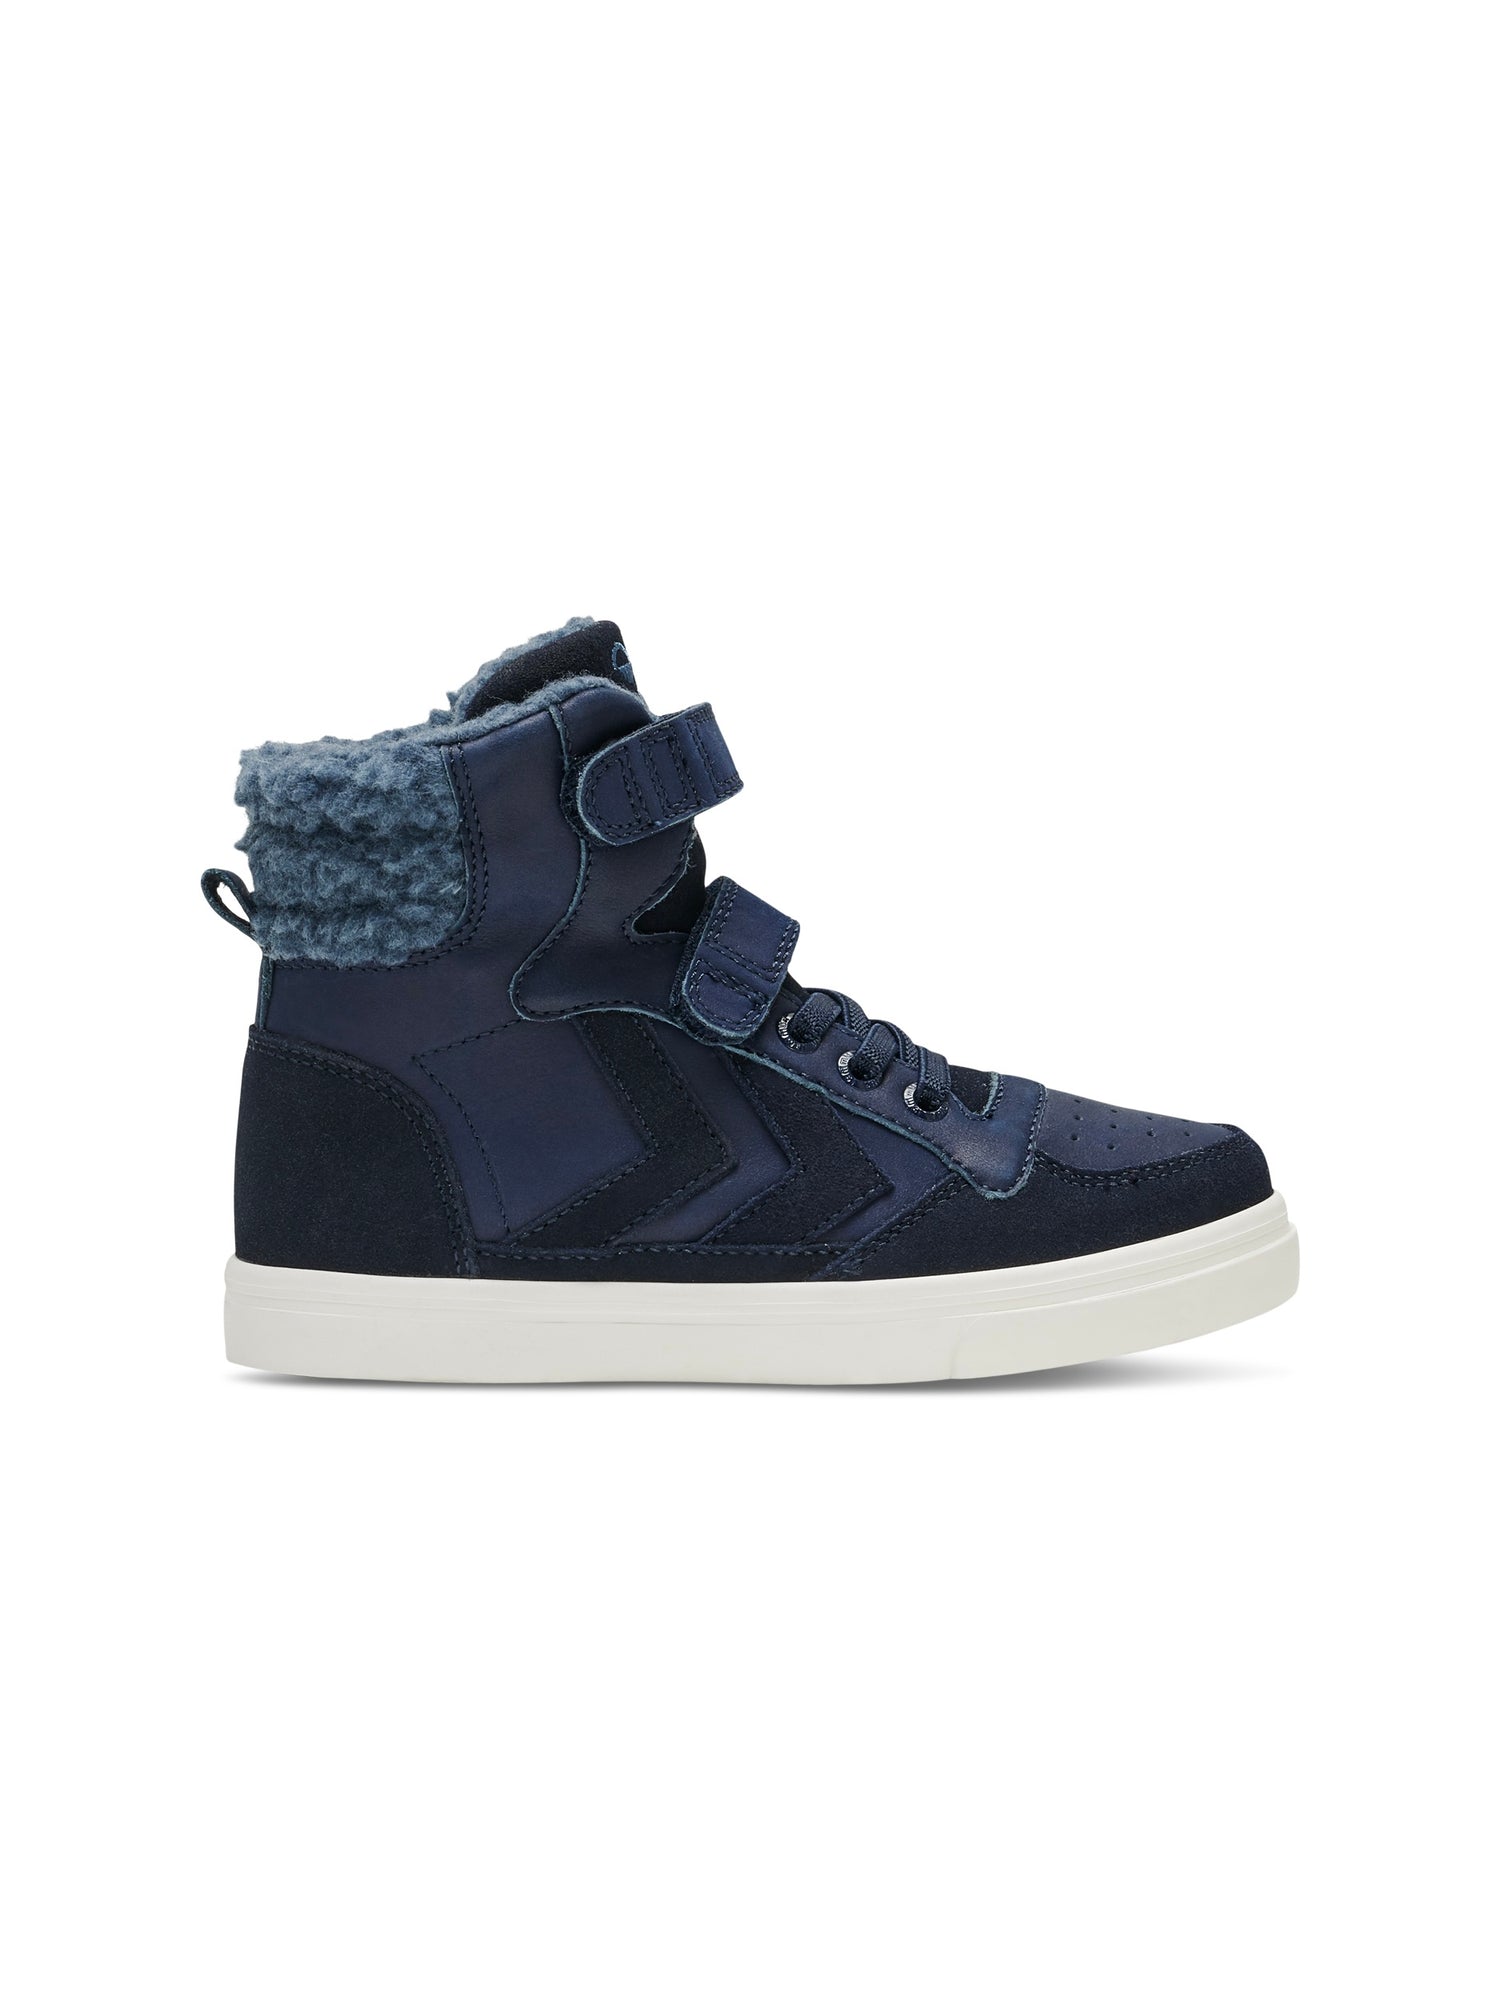 Hummel Stadil Winter Blue Leather Junior High top Trainers – Kids